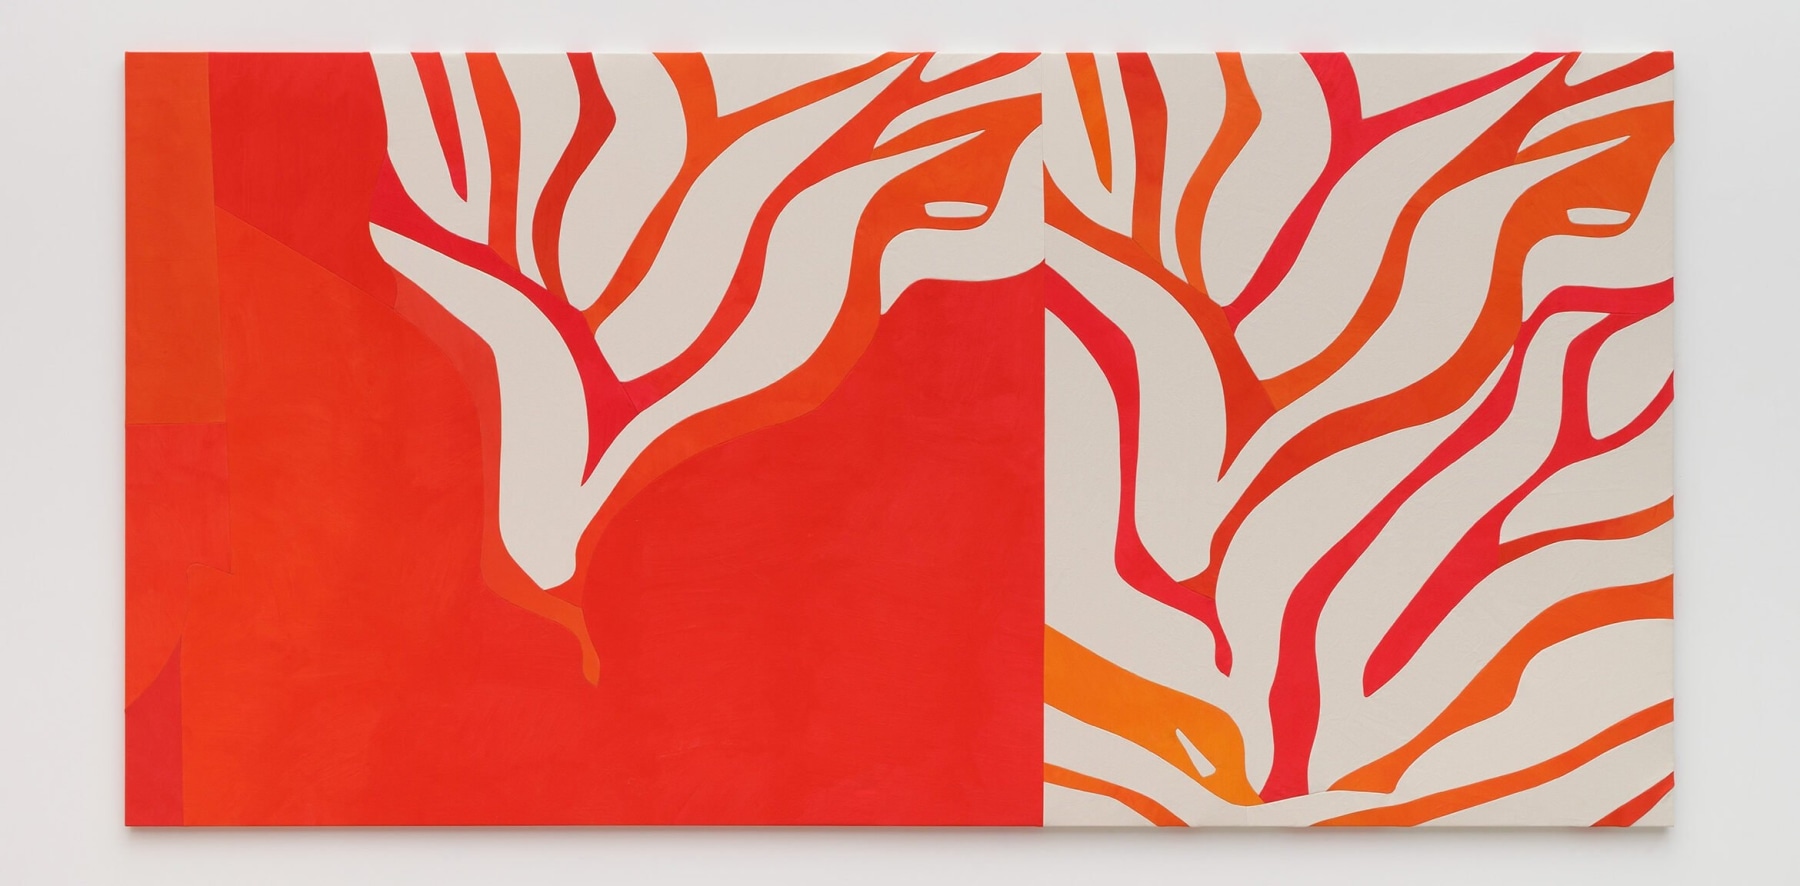 Abstract red and orange painting resembling tree branches